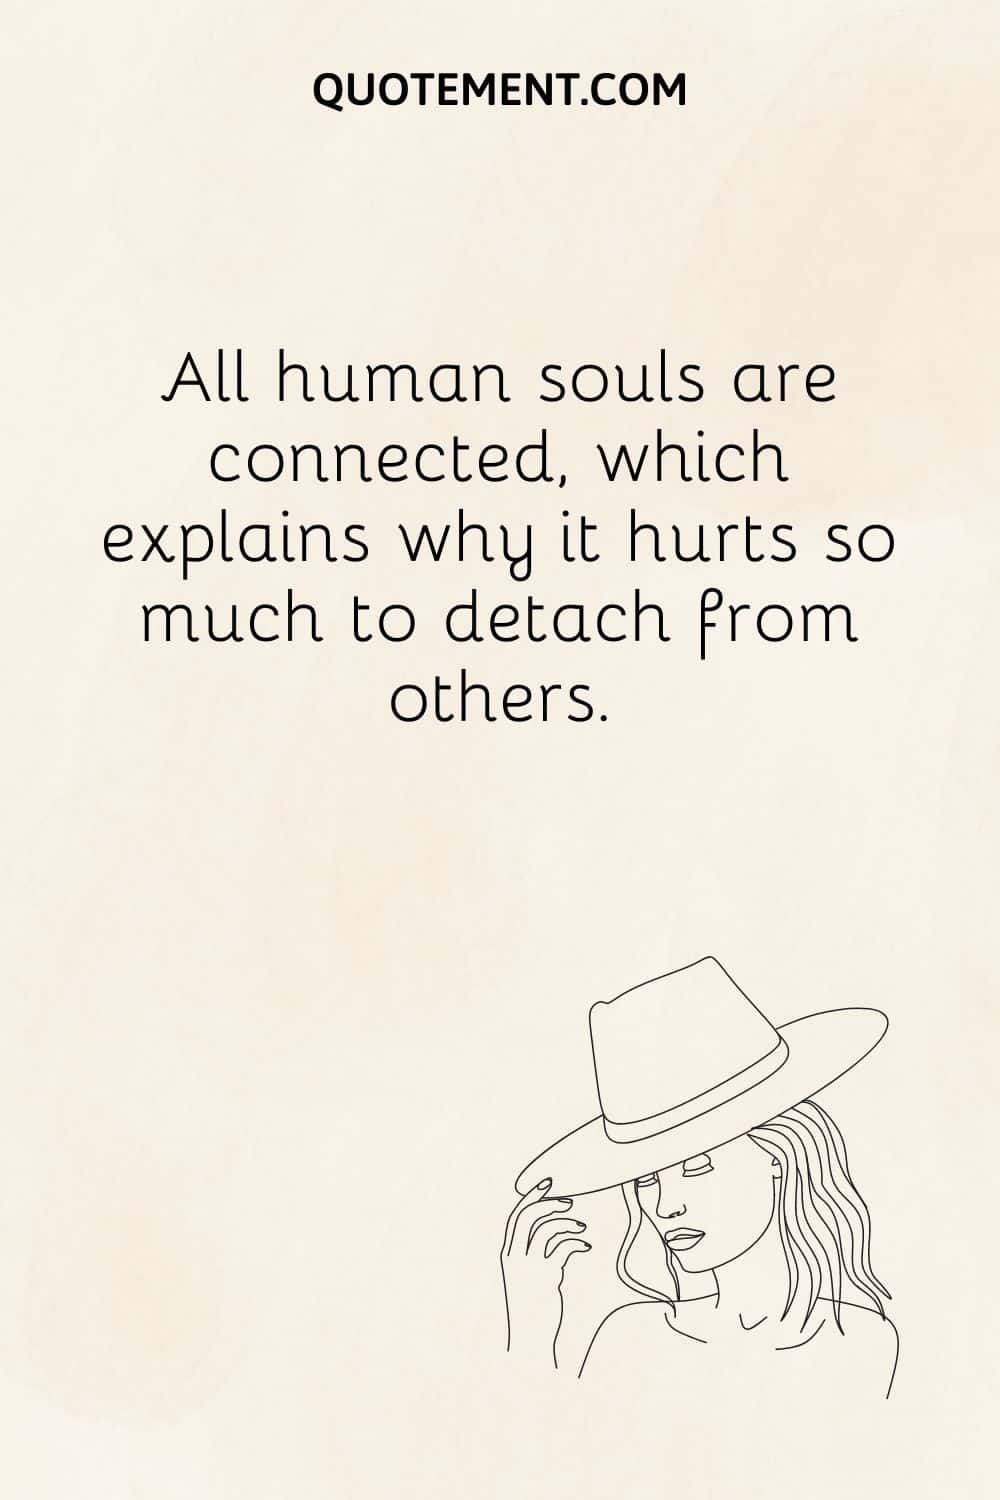 All human souls are connected, which explains why it hurts so much to detach from others.
